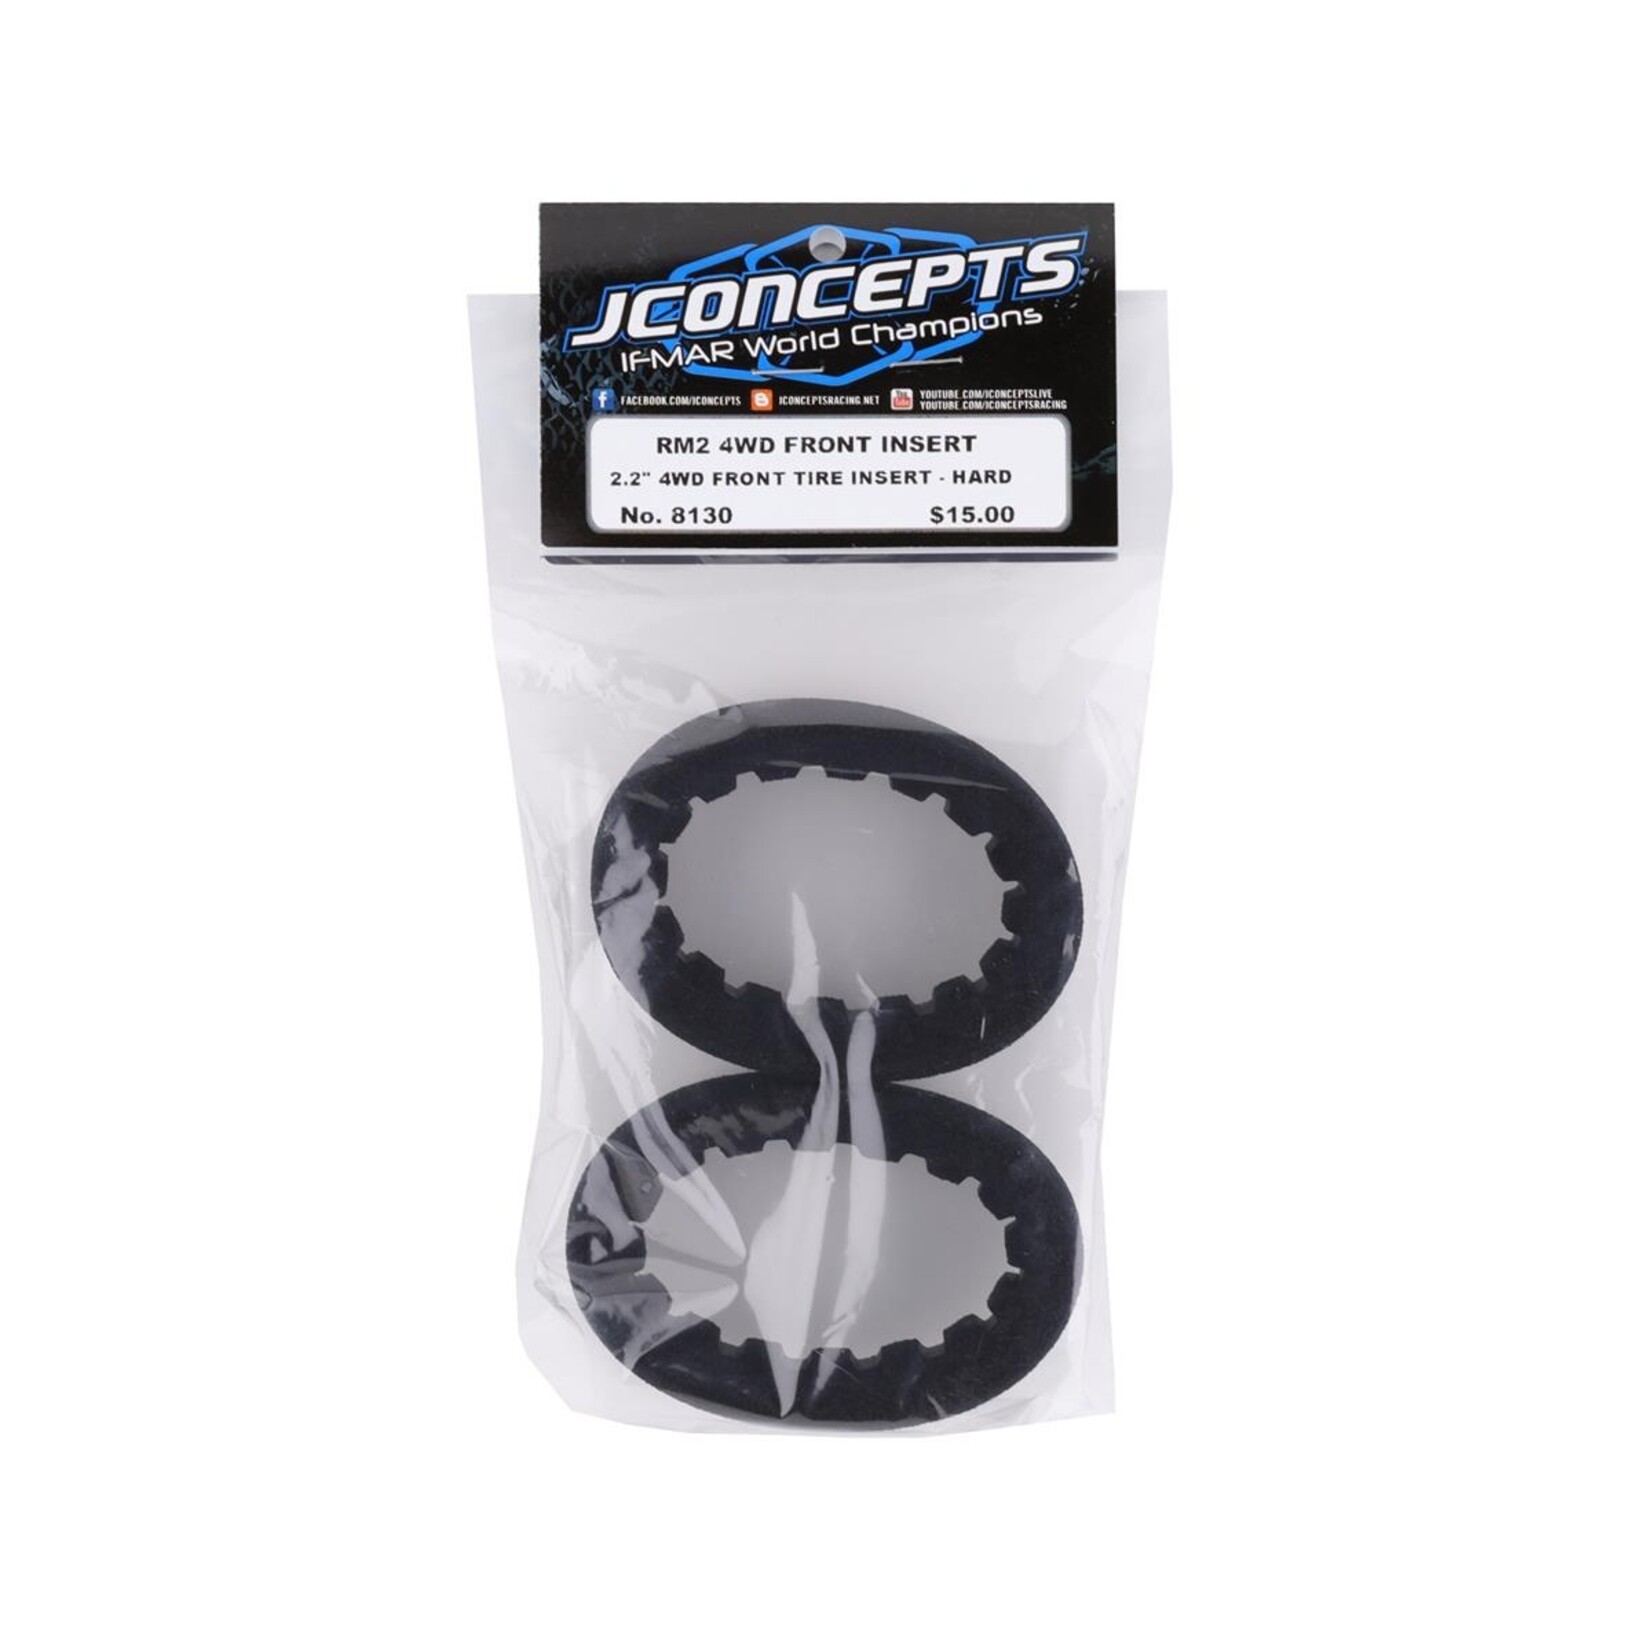 JConcepts JConcepts RM2 4WD 2.2" Front Buggy Hard Inserts (2) #8130